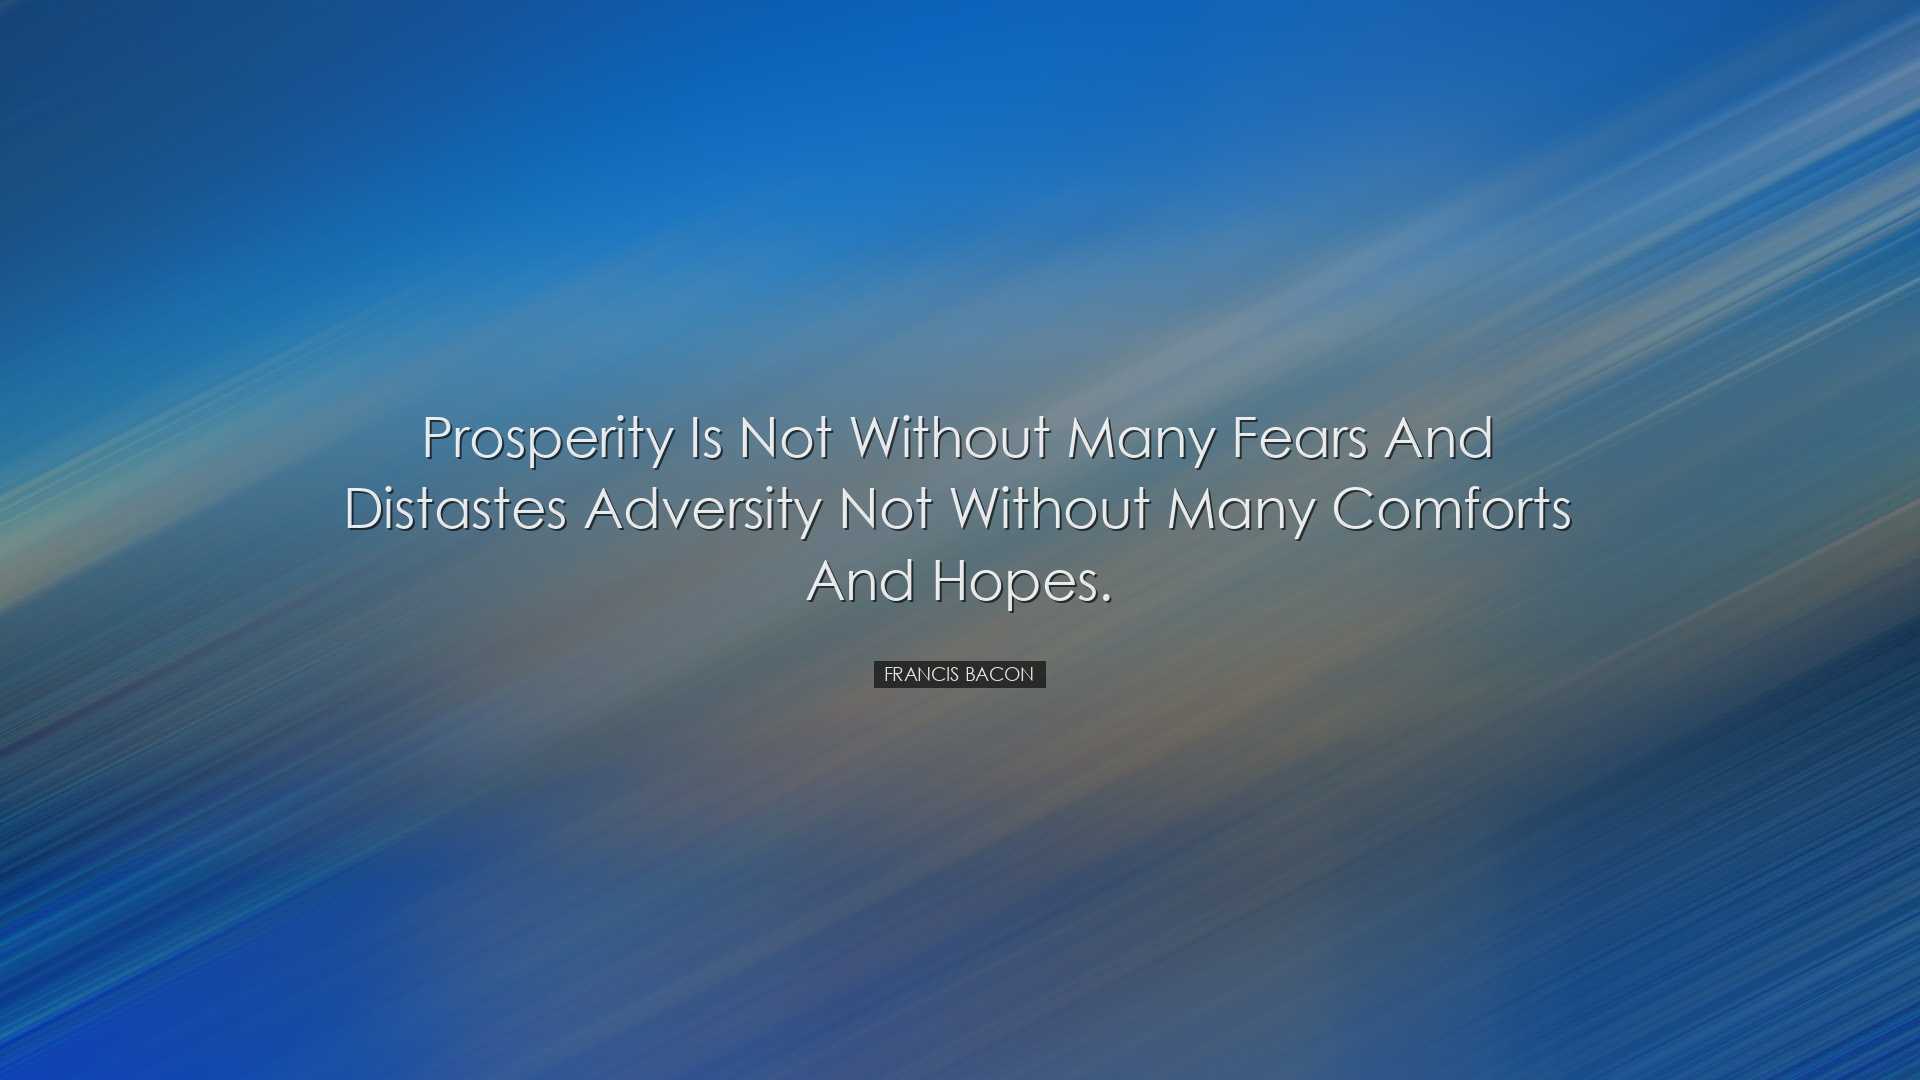 Prosperity is not without many fears and distastes adversity not w